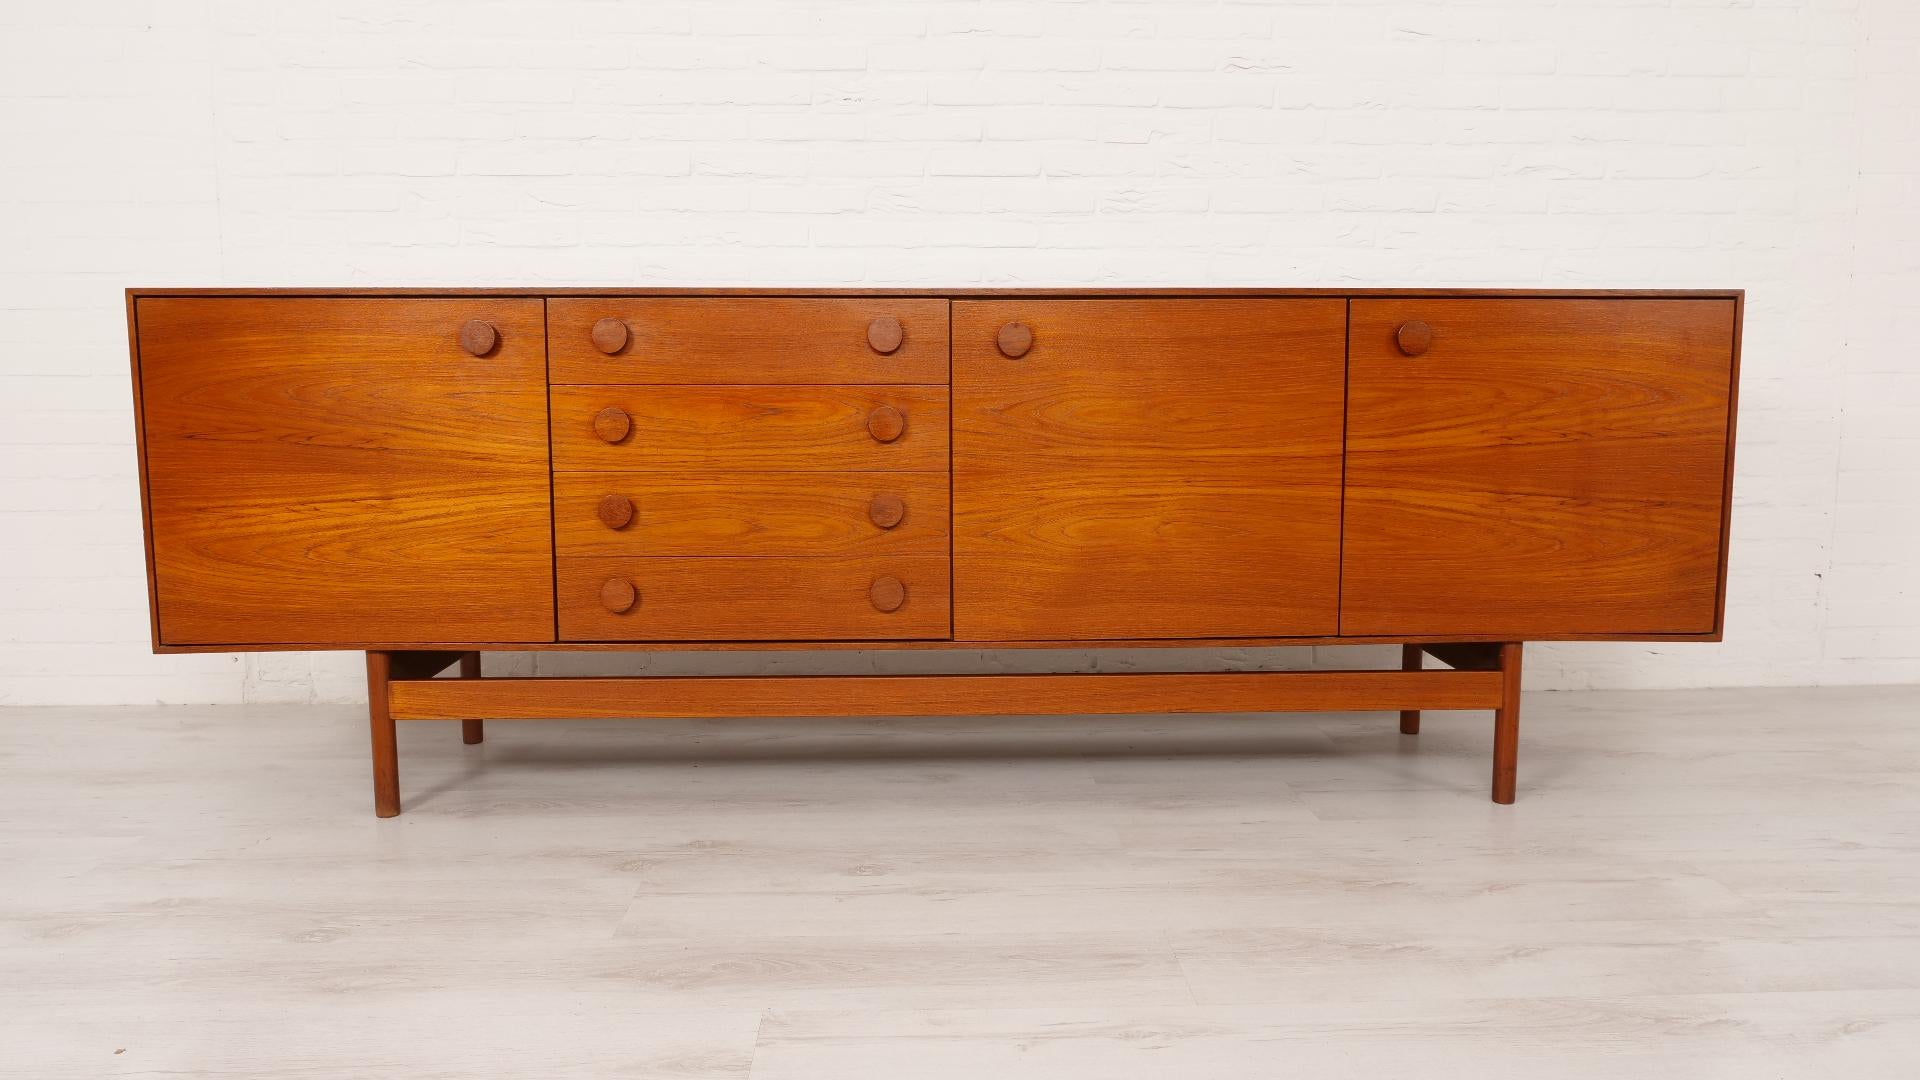 Insanely beautiful vintage sideboard designed by Ib Kofod-Larsen for Faarup Møbelfabrik in the 1960s. The vintage cabinet has a warm colour of wood and very nice round handles that are characteristic of Ib Kofod-Larsen's designs. The base completes